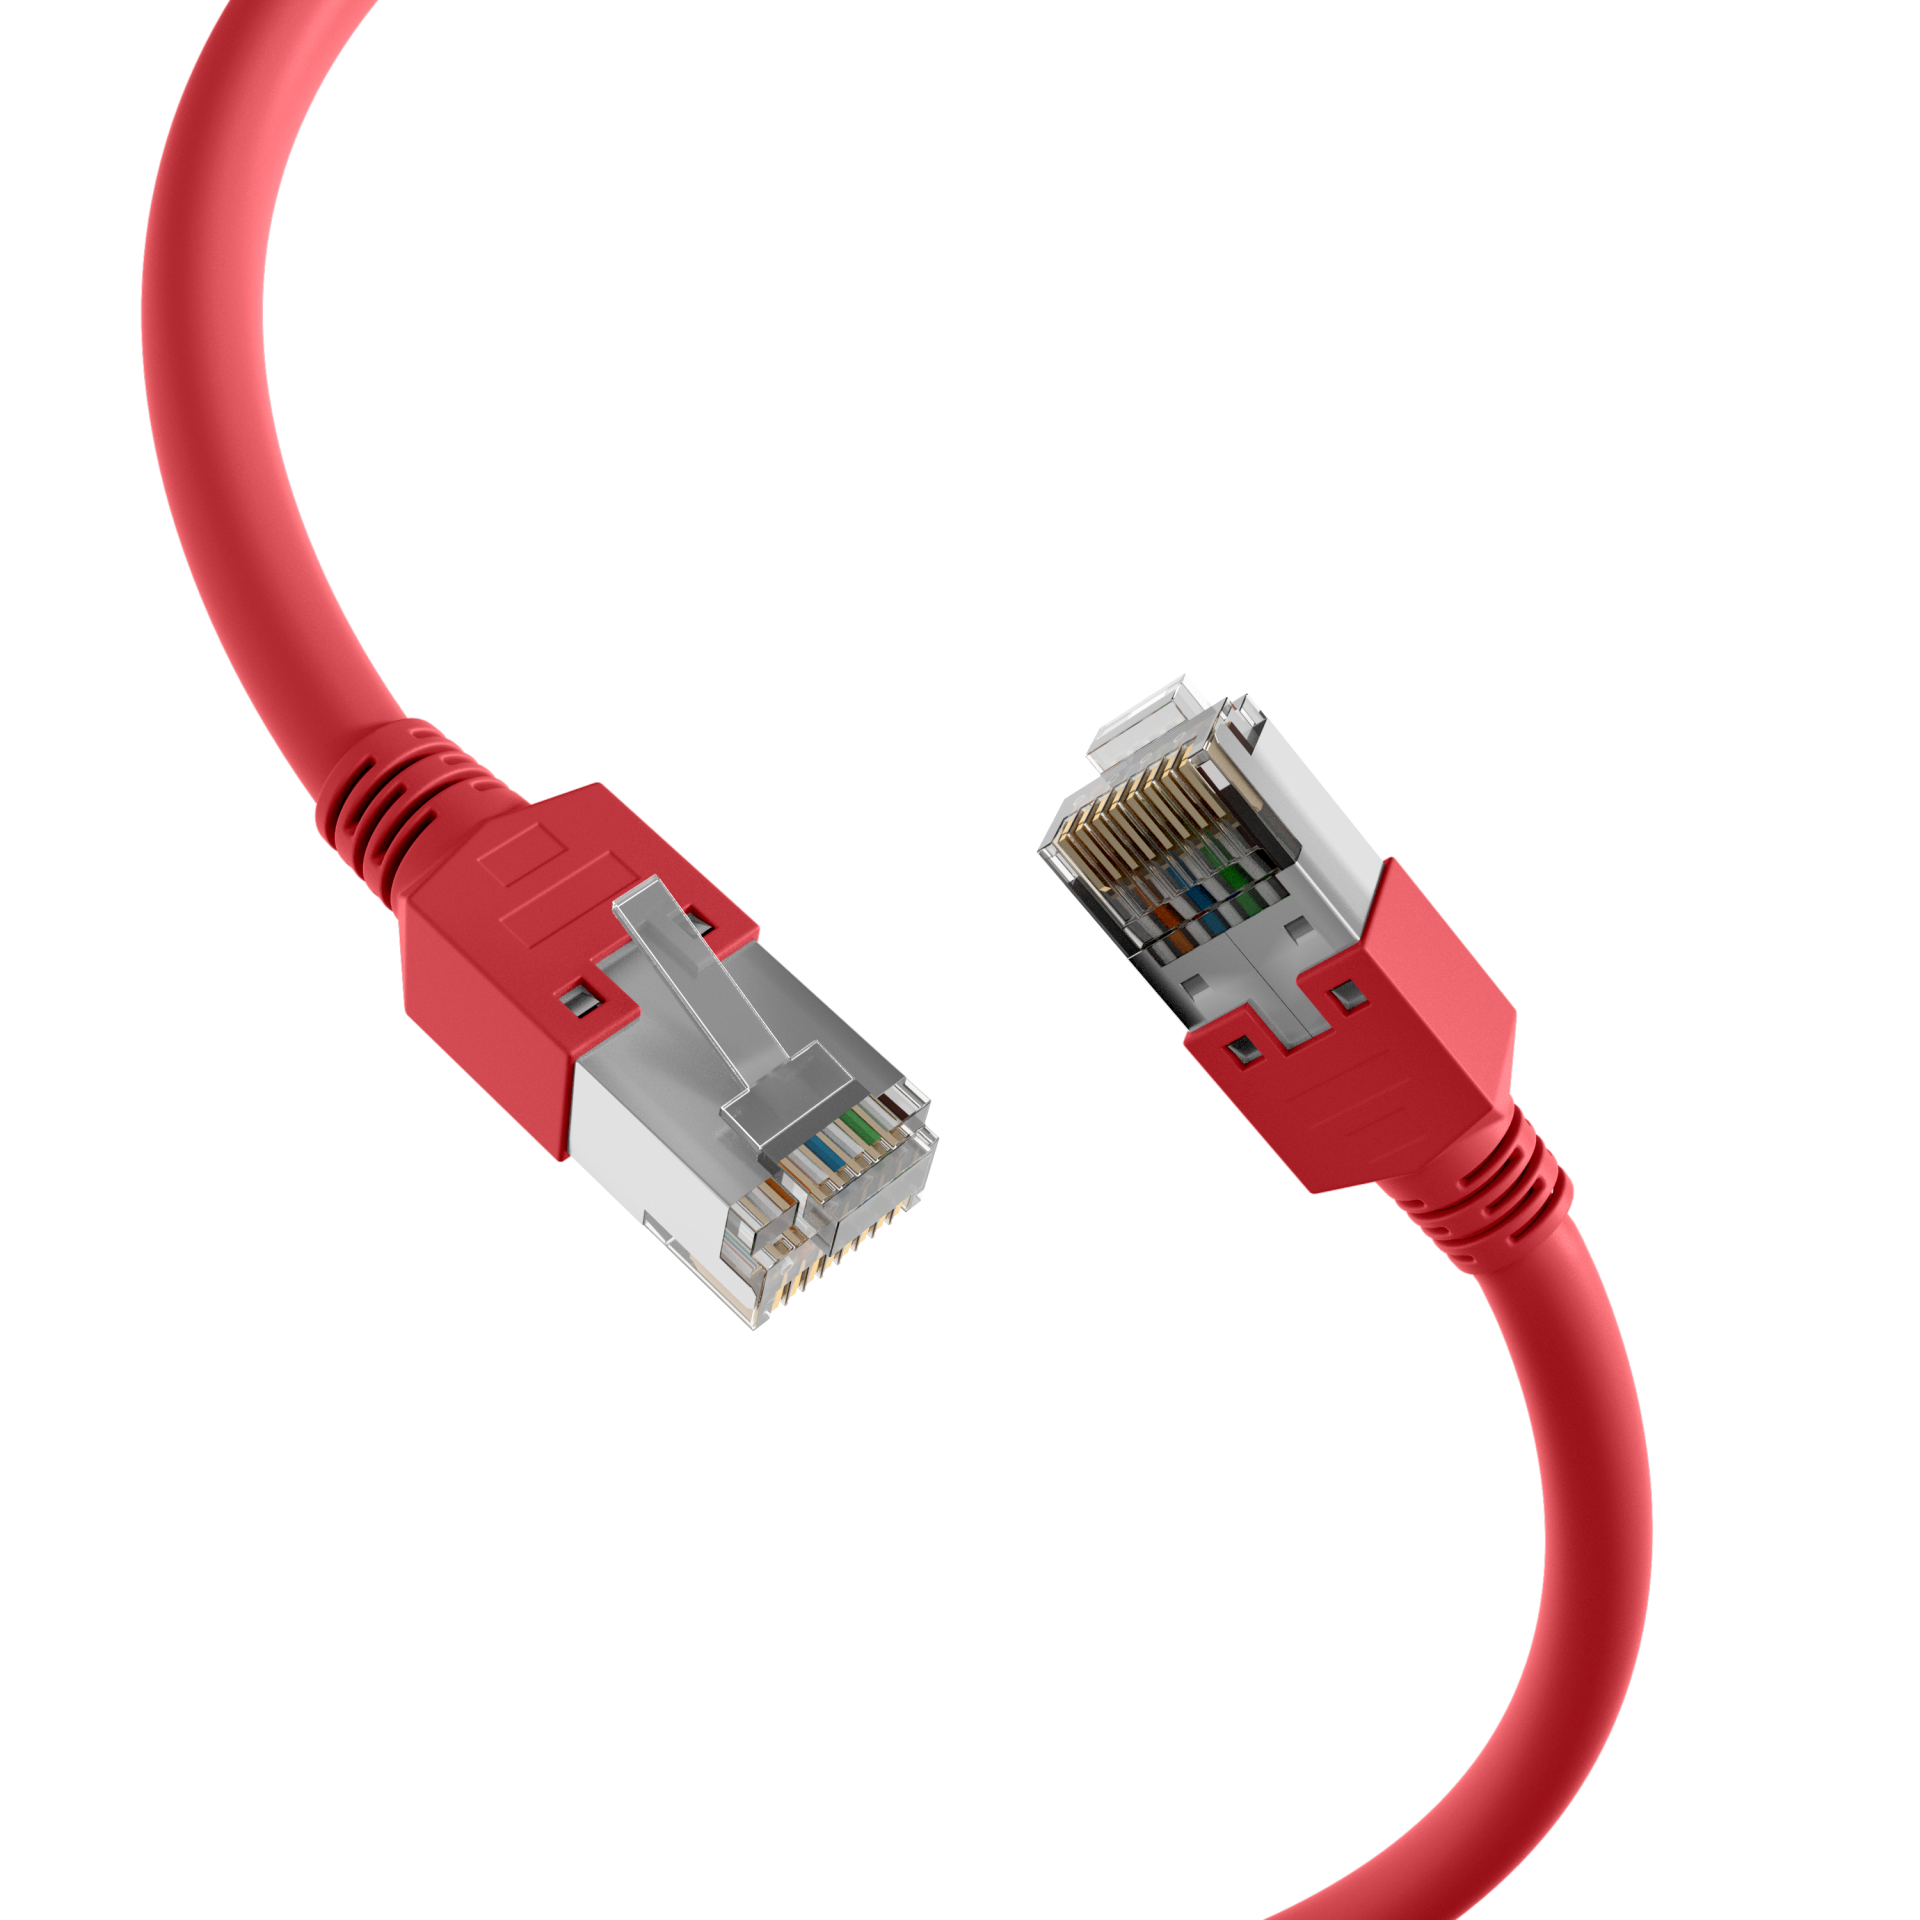 RJ45 Patch Cord Cat.5e S/UTP PVCDätwyler 5502 TM11 red 20m